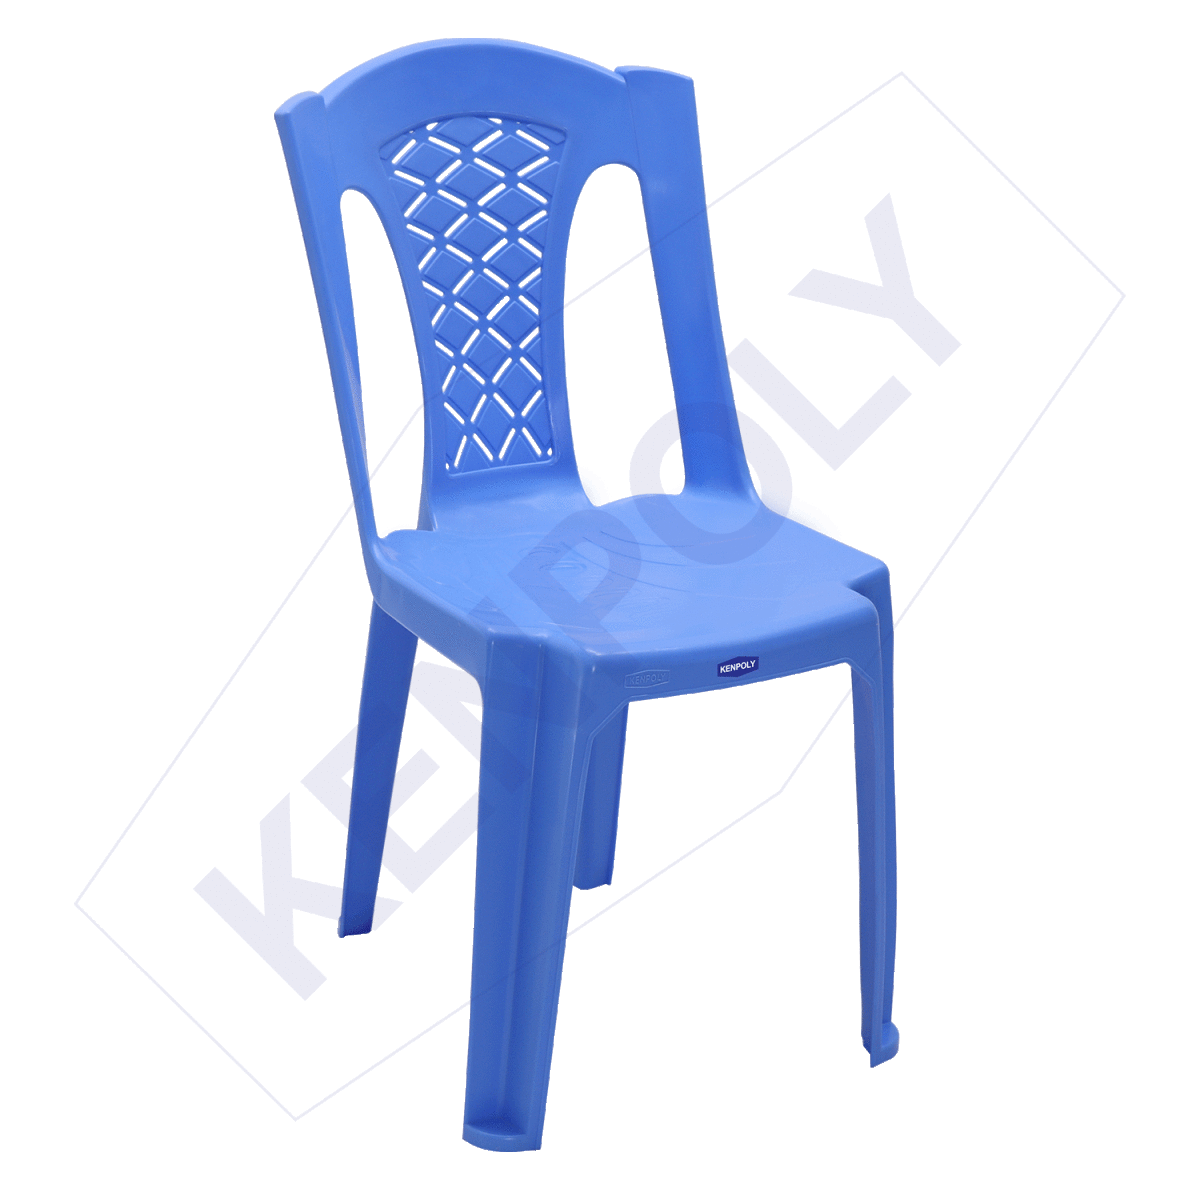 Chair 2032 without Arms